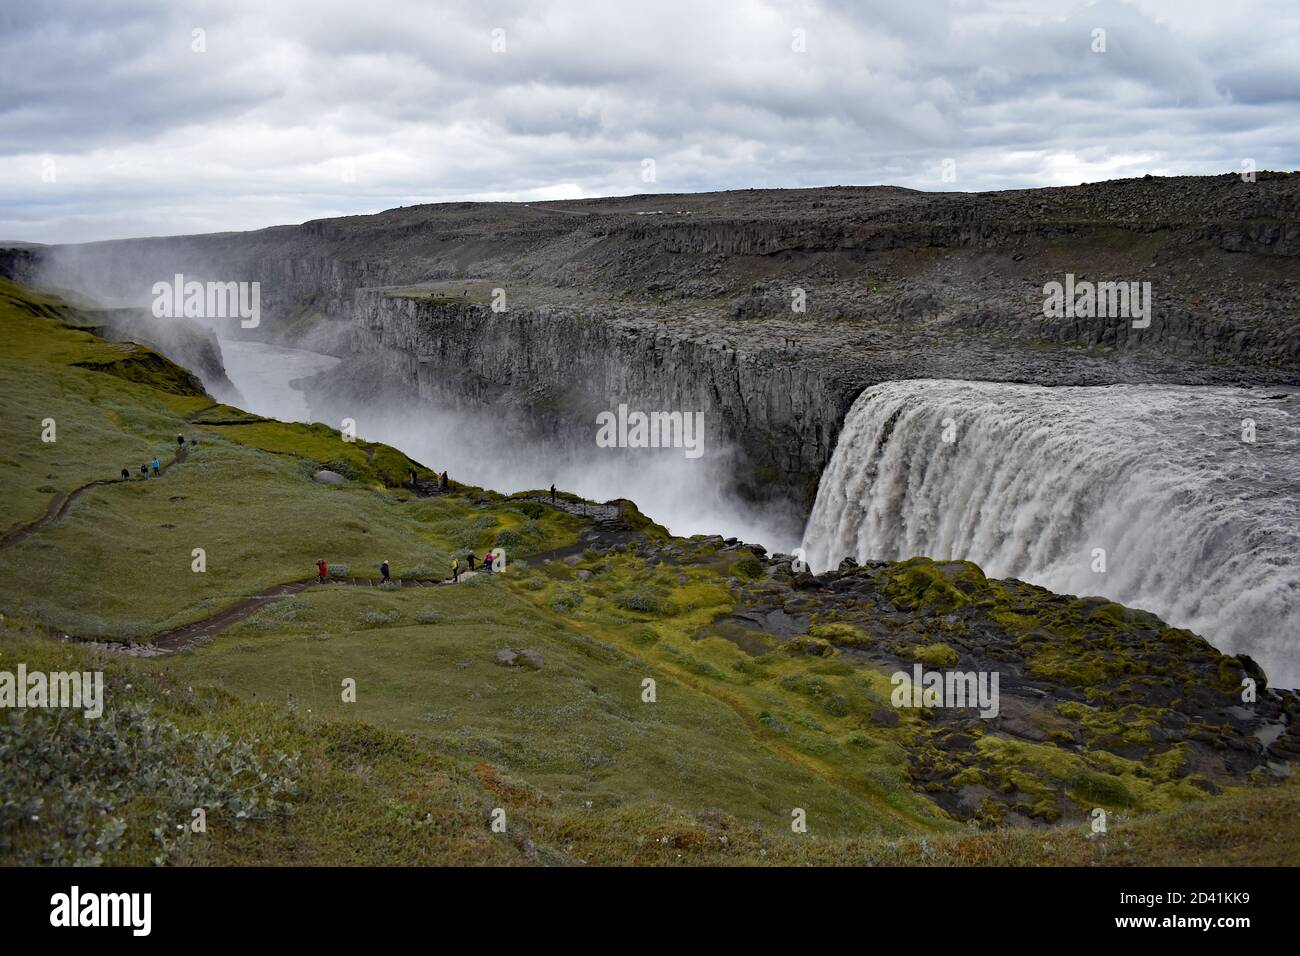 Dettifoss Waterfall in Northeast Iceland as it plunges into Jökulsárgljúfur canyon.  Mist rises from the power of the grey water rushing over the edge. Stock Photo